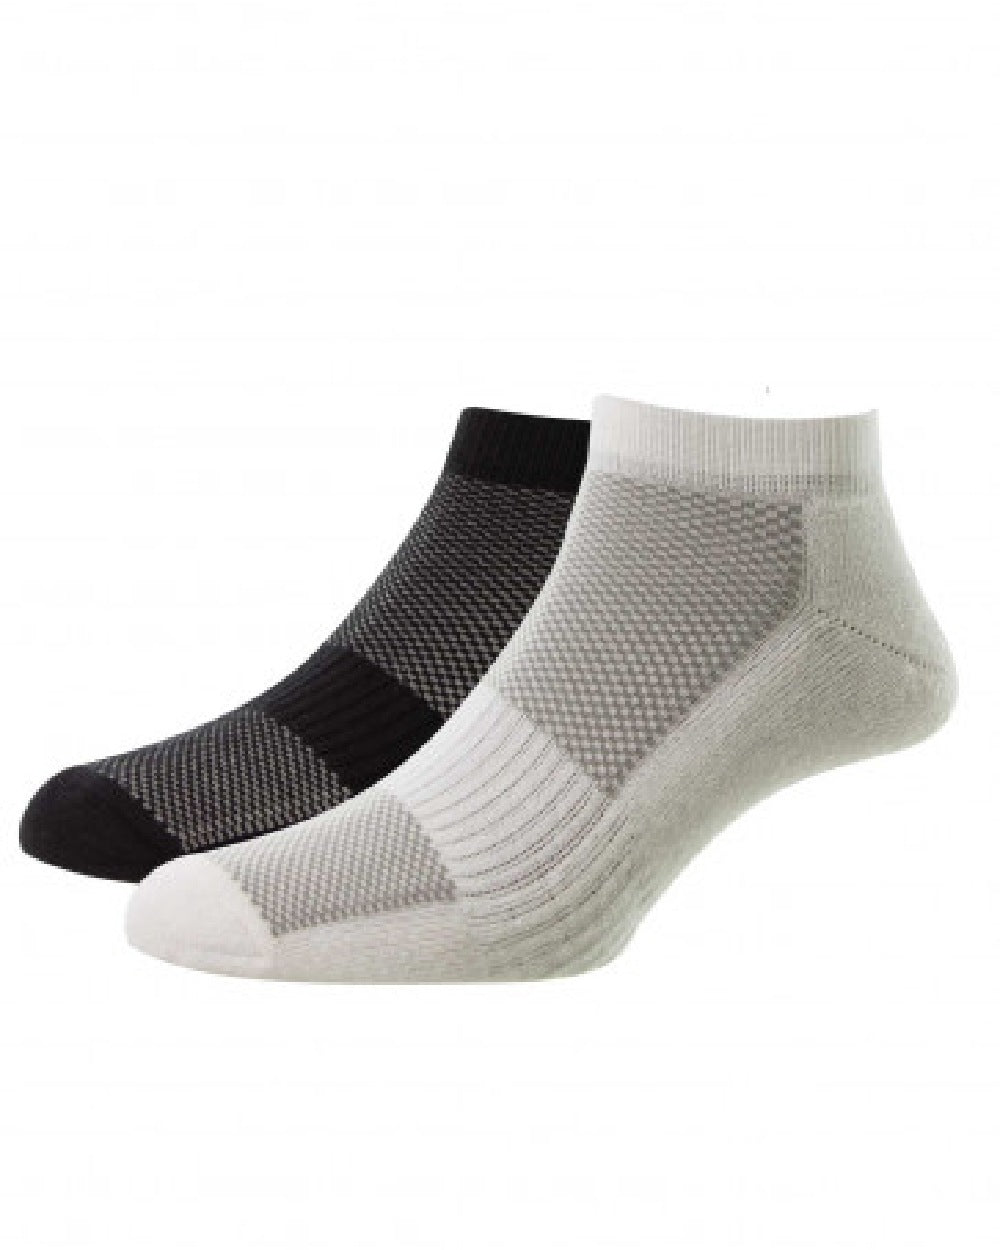 HJ Hall Bamboo Trainer Socks | Twin Pack in Black and White 